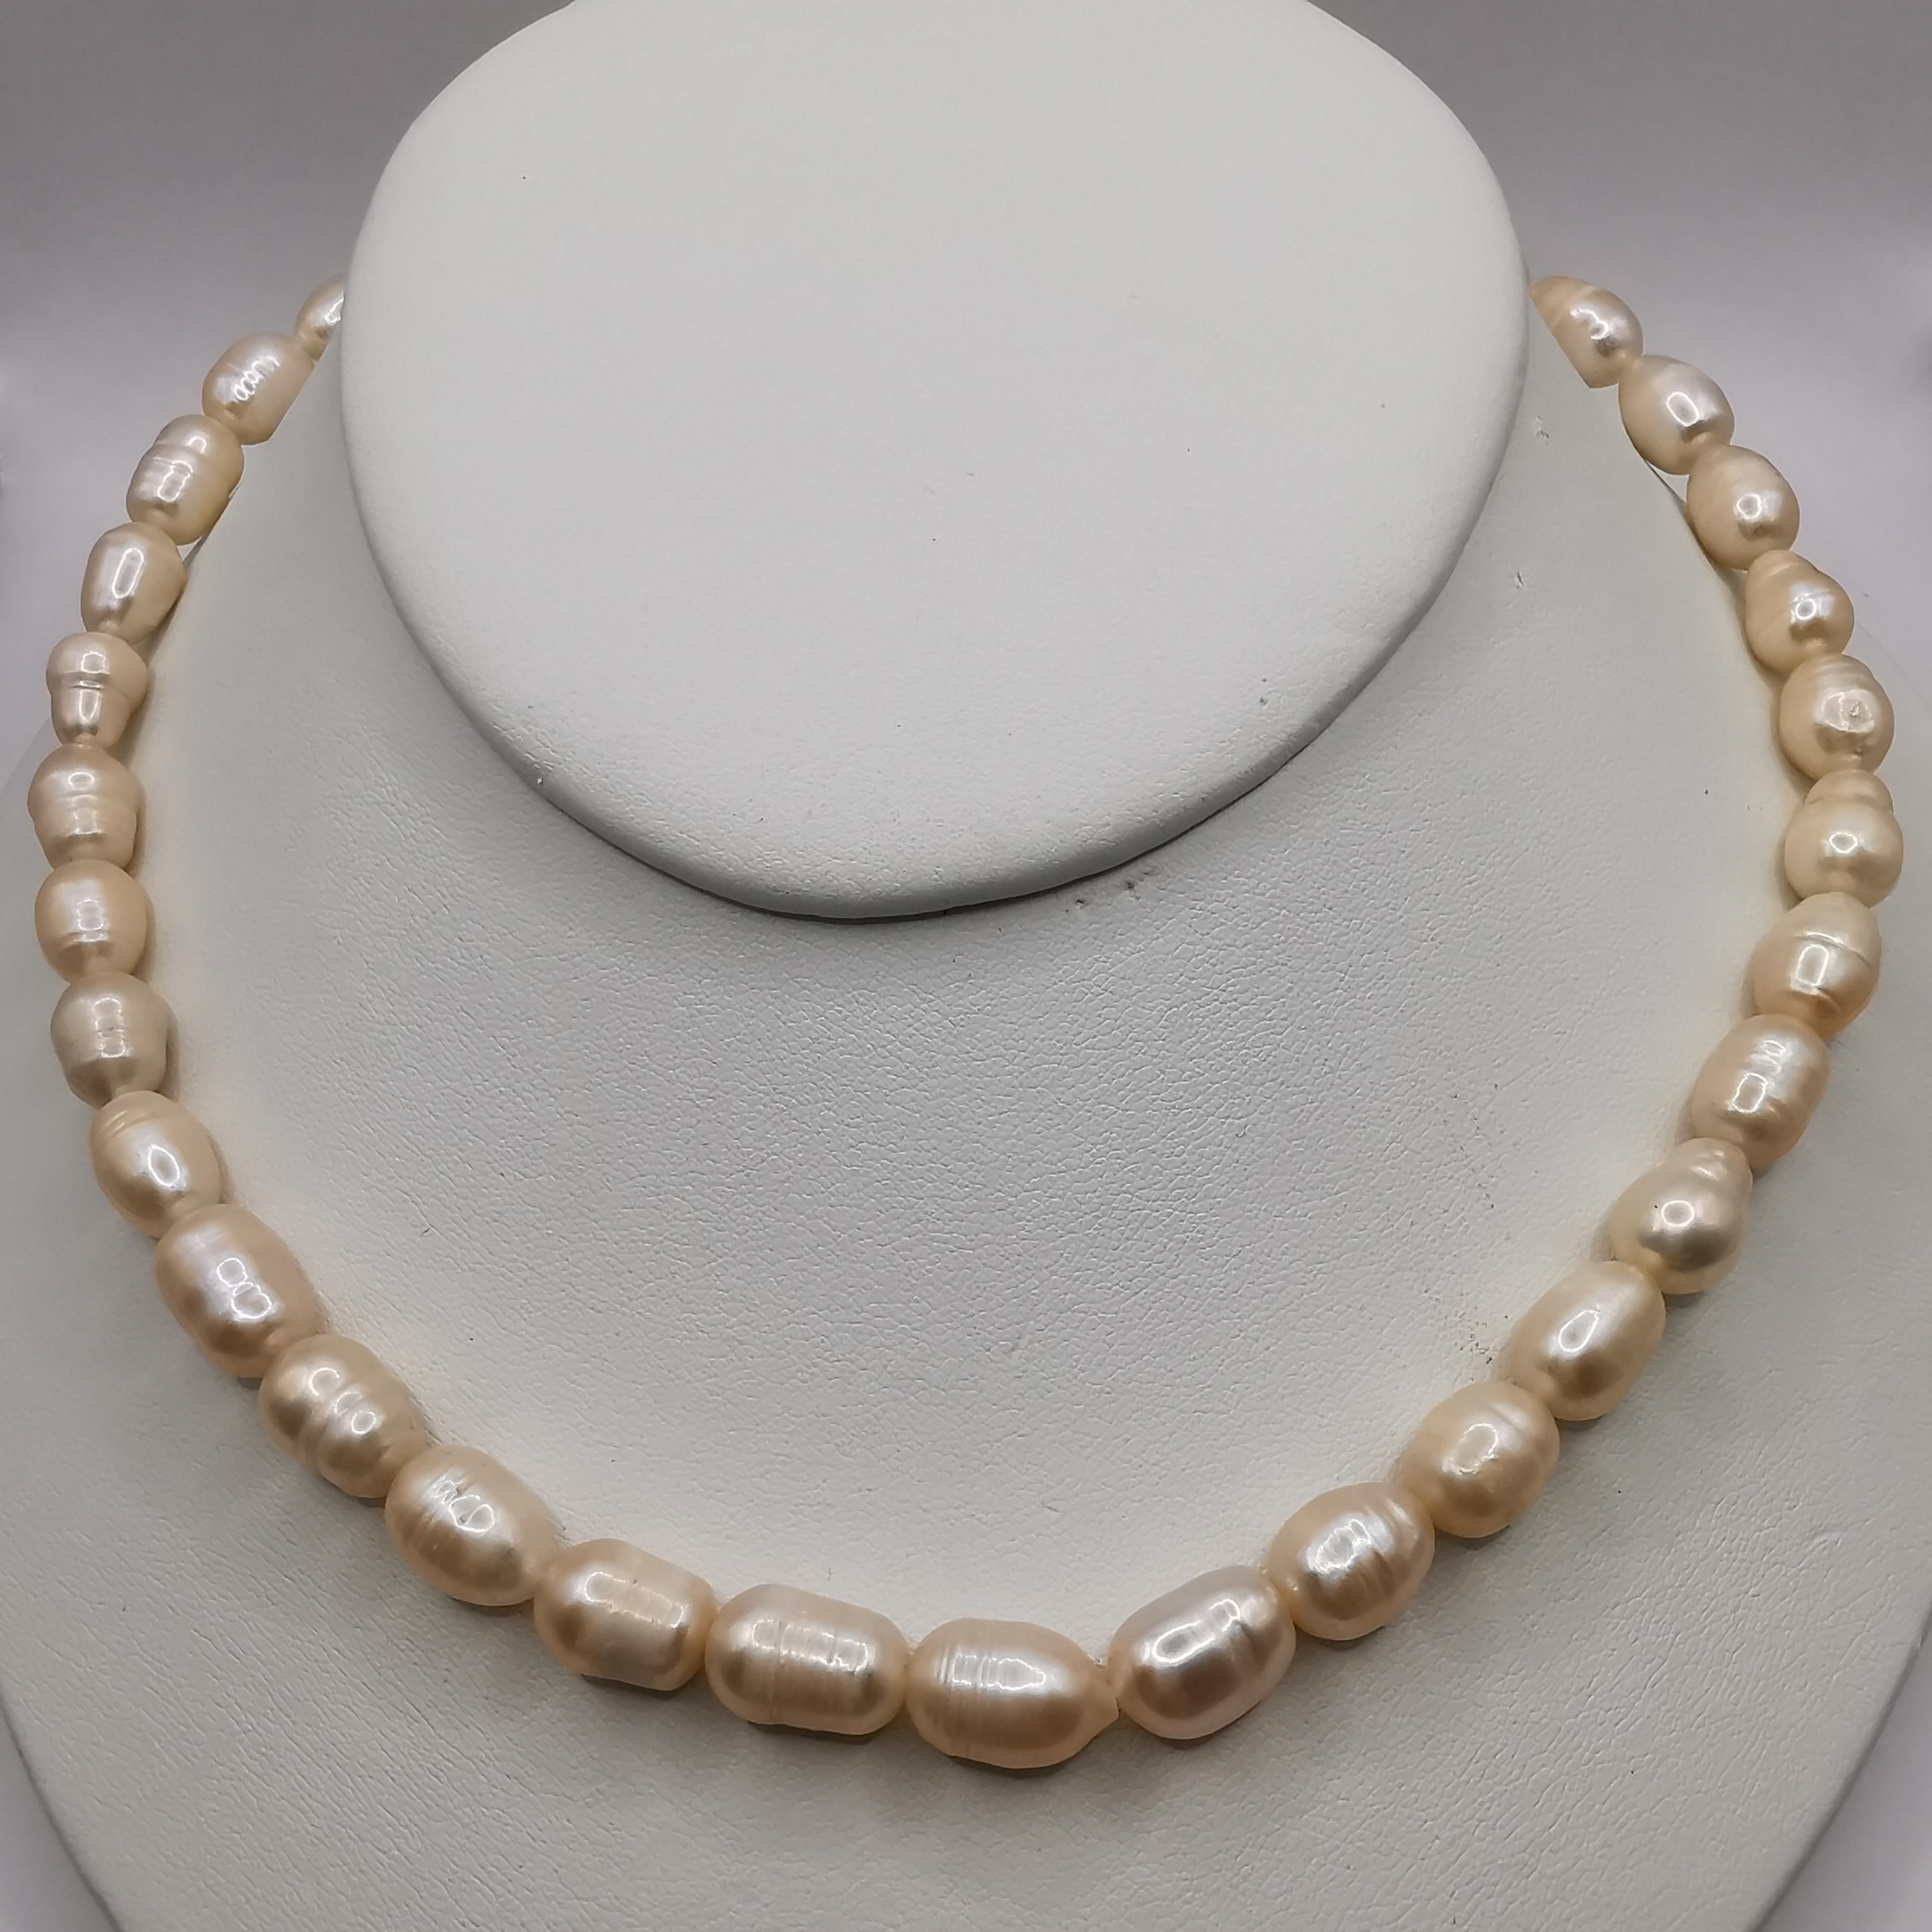 This beautiful freshwater cultured baroque pearl necklace is a perfect accessory for any occasion. The necklace features a strand of 36 freshwater cultured pearls that have a classic white color, which is sure to complement any outfit. The baroque